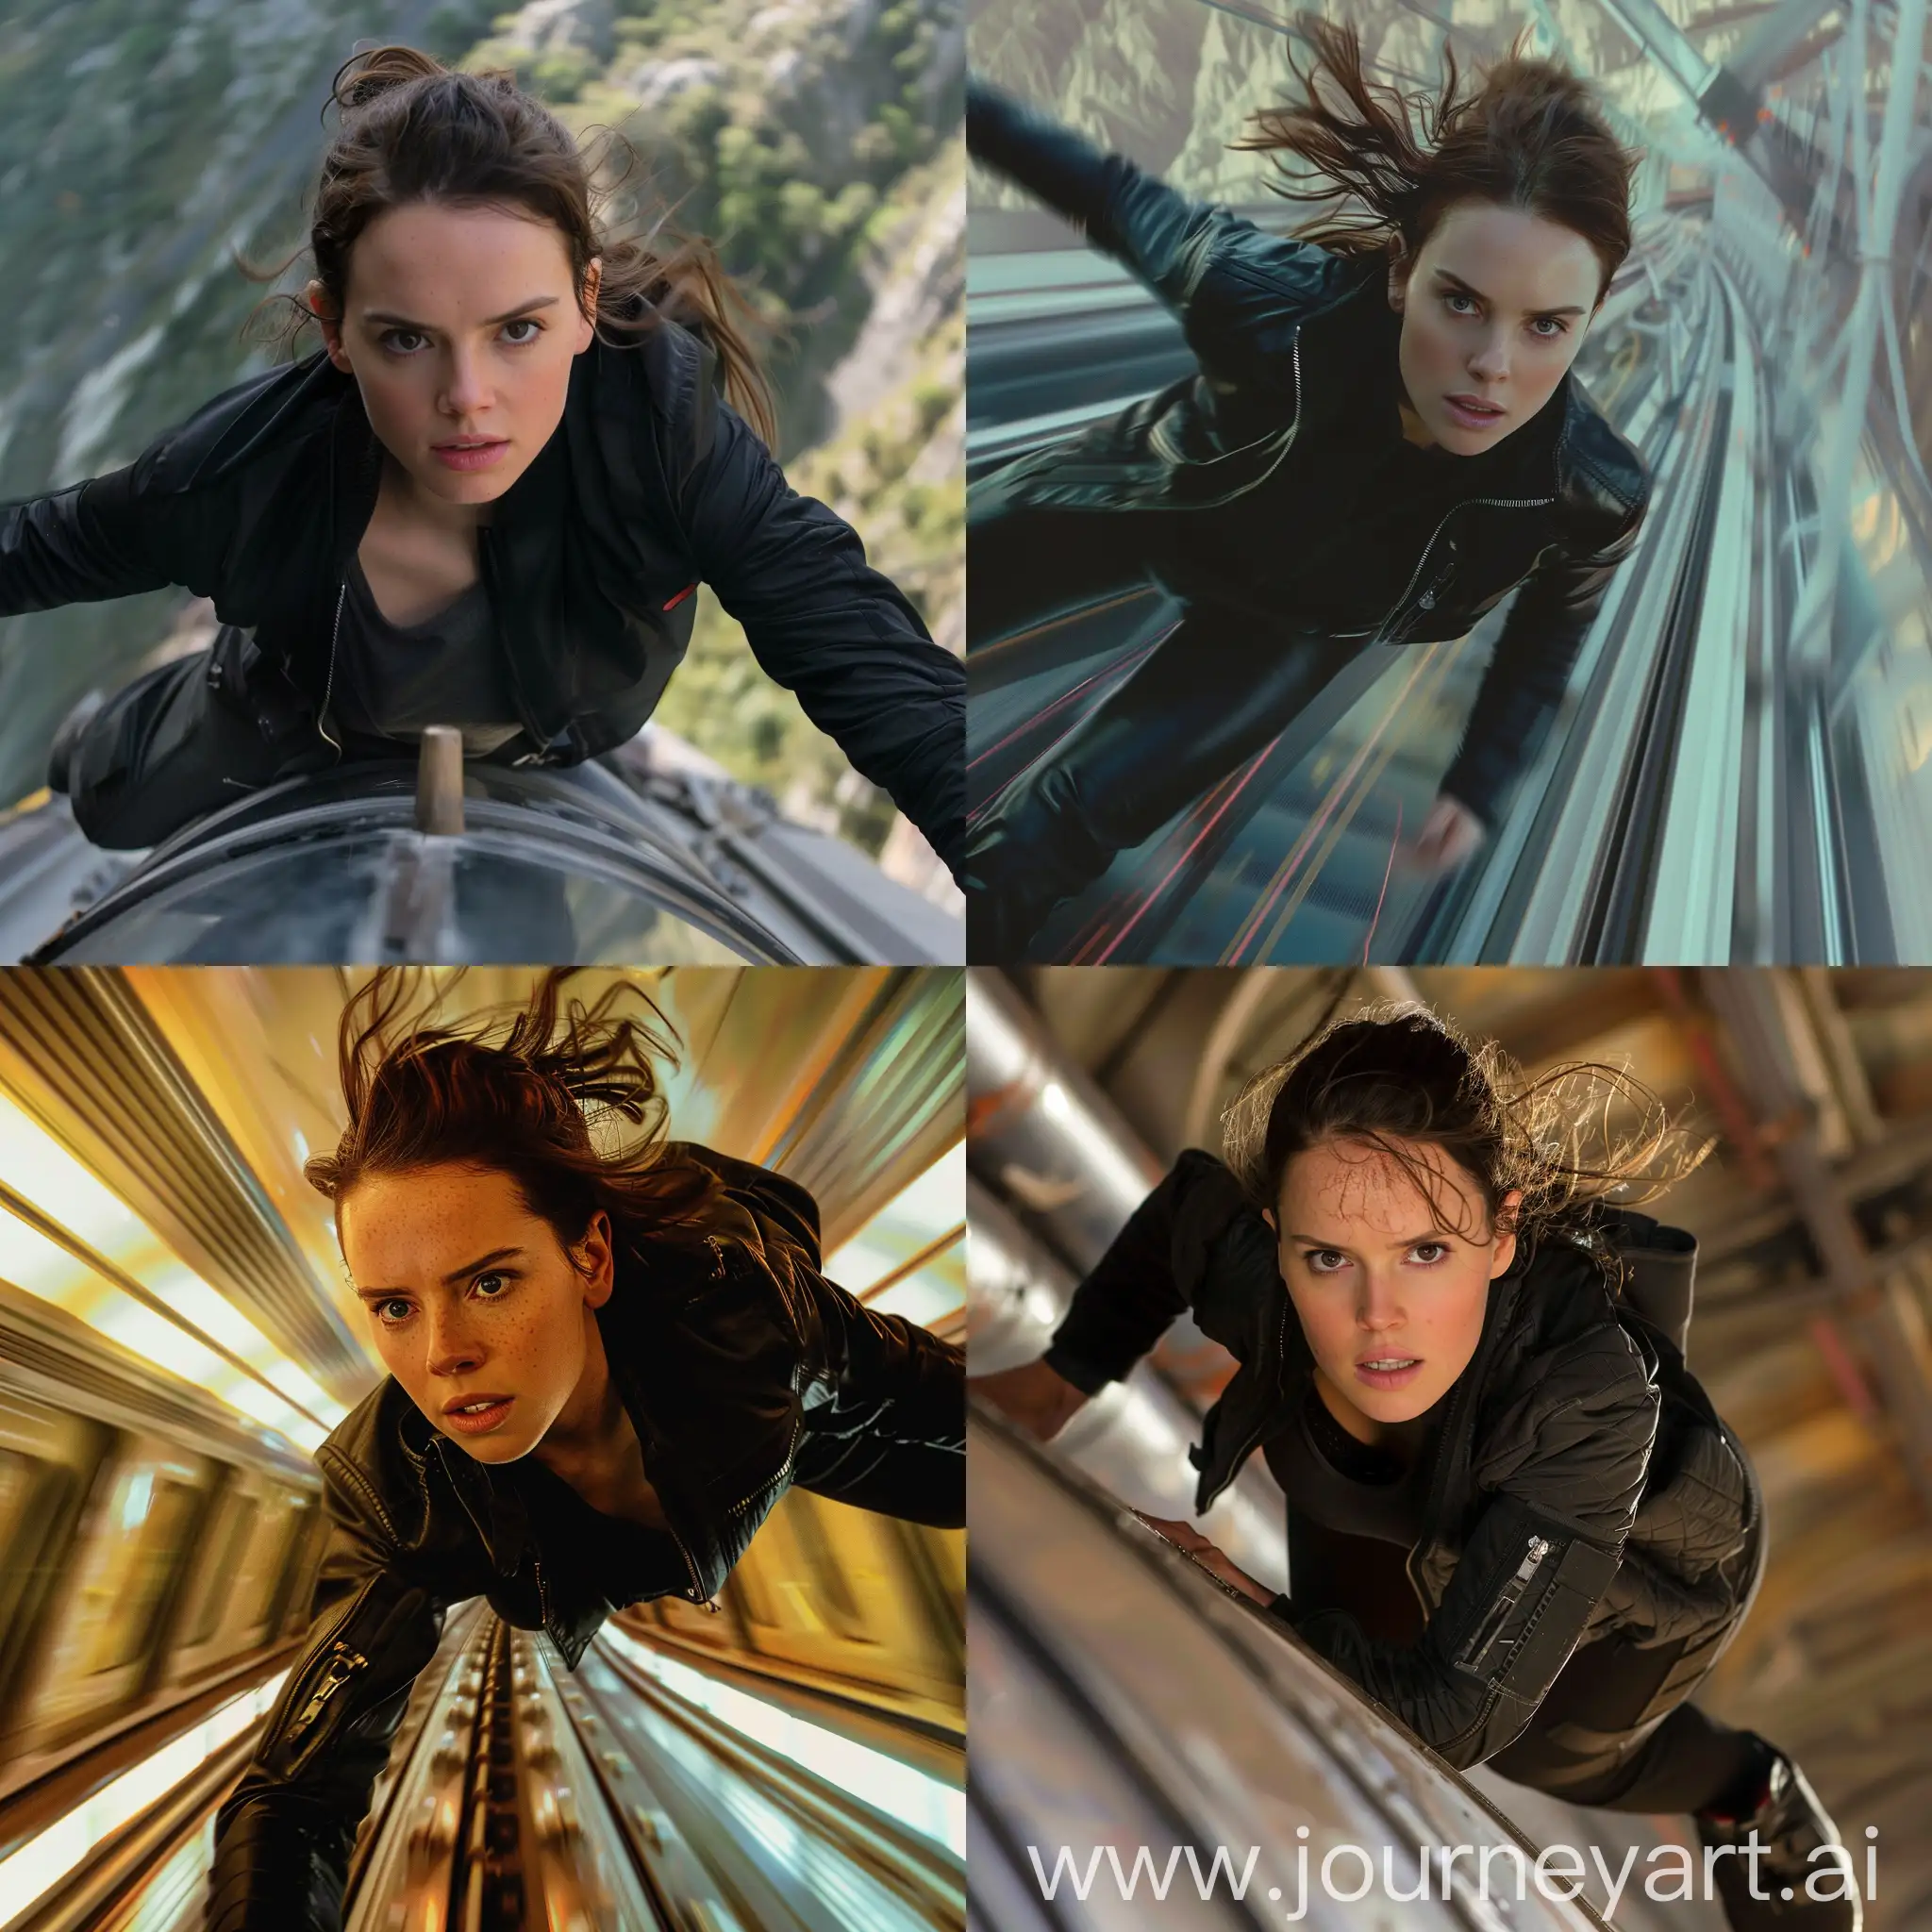 actress Daisy Ridley With Black jacket in The Movie Mission Impossible. She in on a top of a speeding Train,in a dangerous scene, 8k resolution